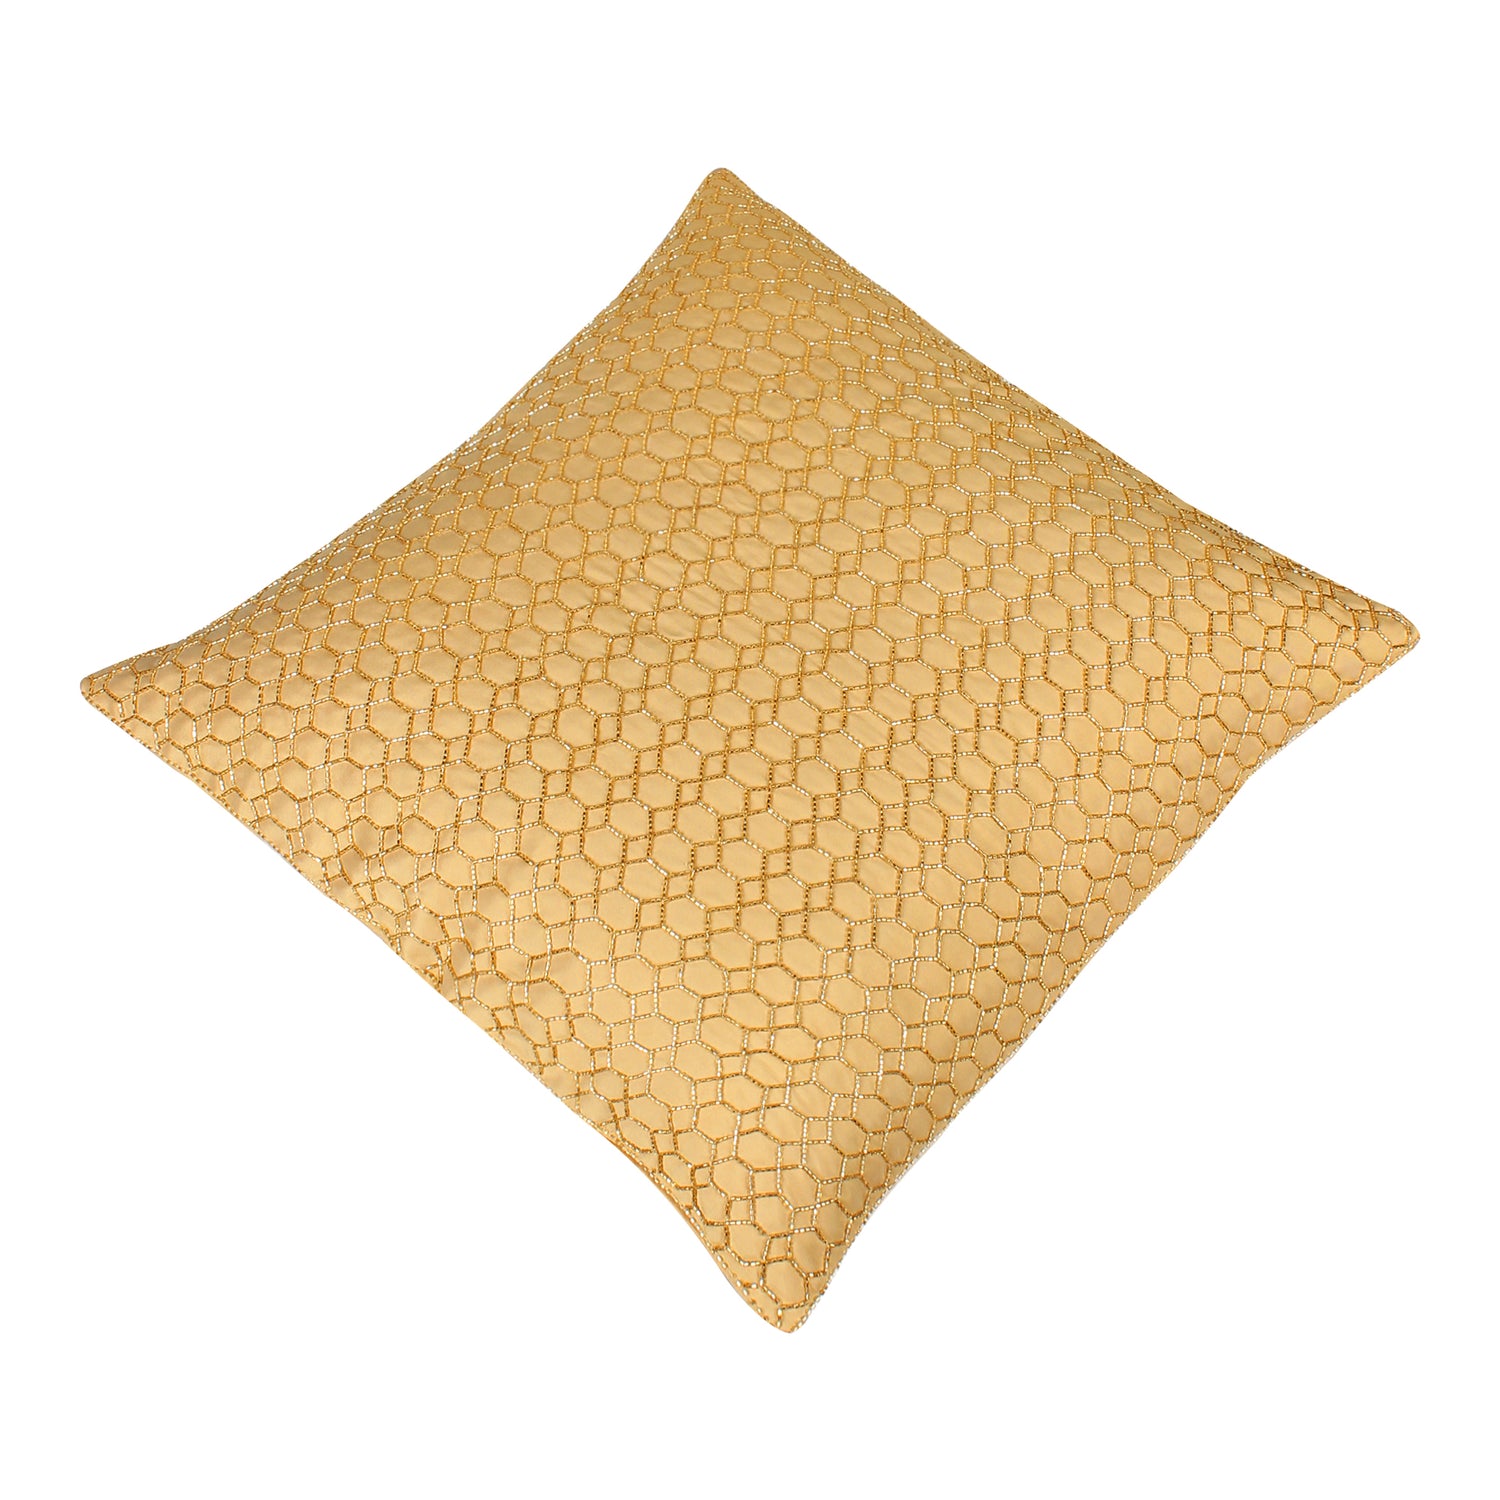 designer cushion covers, buy cushion covers online